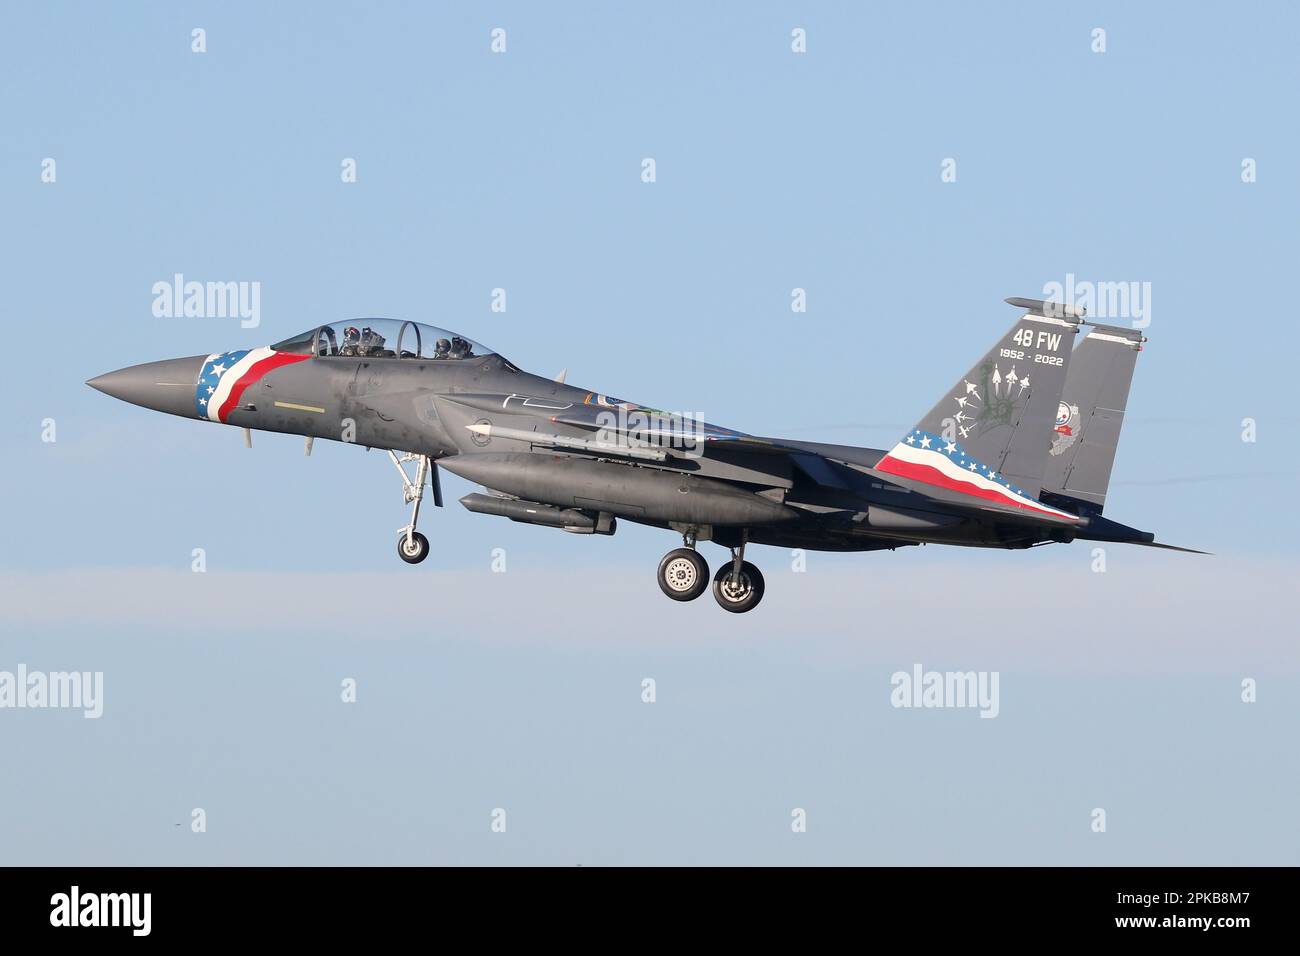 USAF F-15E assigned to the 48th Fighter Wing landing at RAF Lakenheath. Aircraft carries a special colour scheme for the 48th FW 70th anniversary. Stock Photo